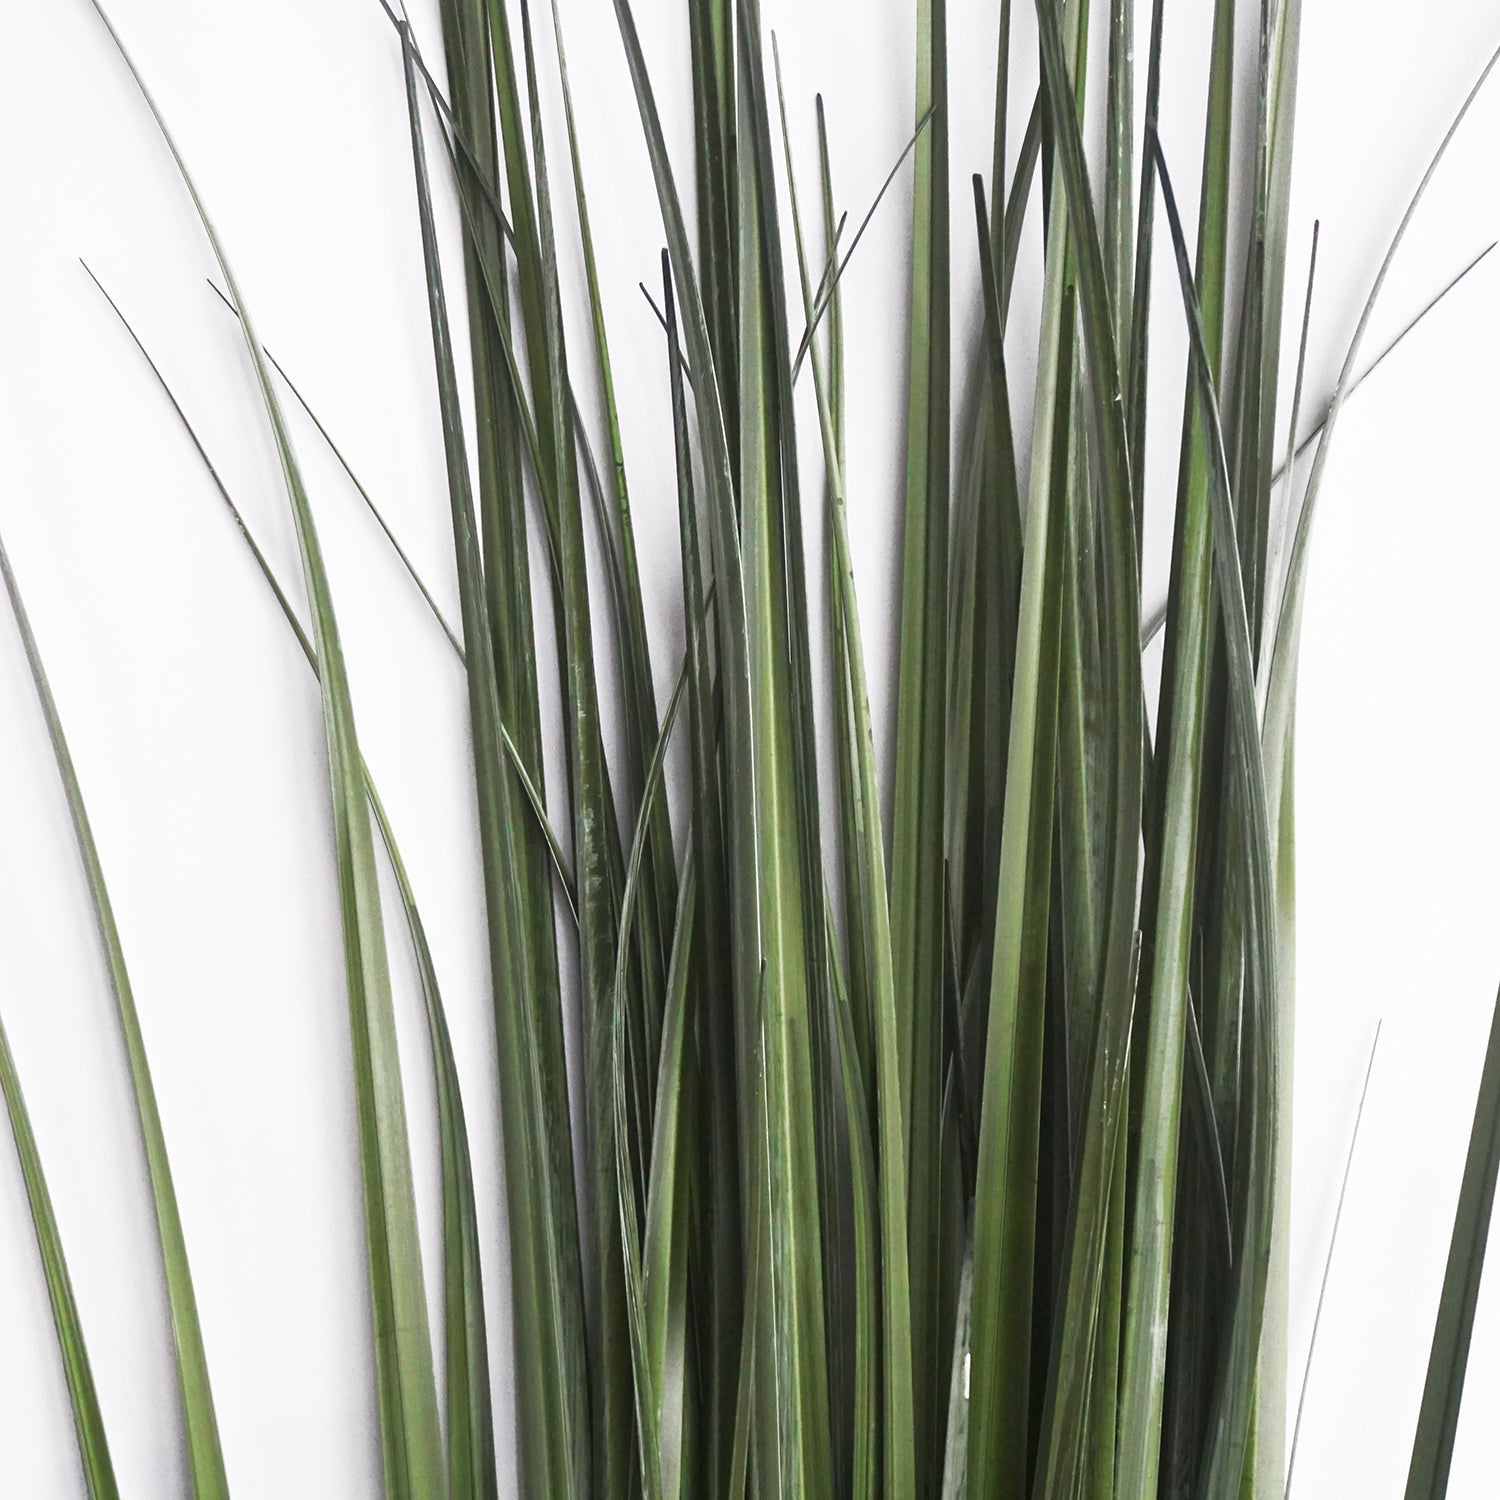 Grass: Cane 65"H, Potted